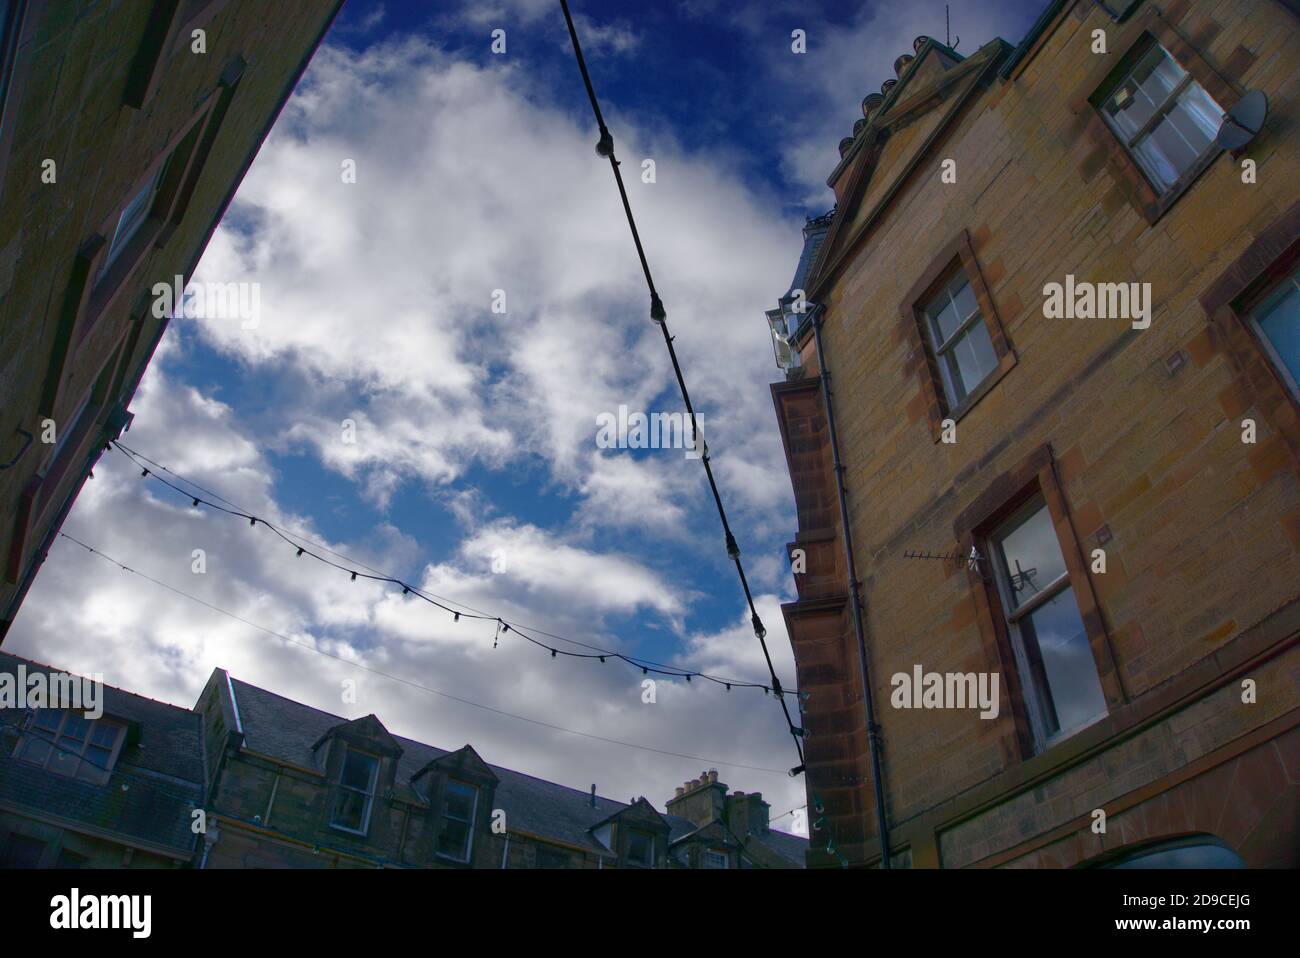 Lights and wiring silhouetted against the sky as seen from ground level at the corner of Channel Street, Galashiels, Scottish Borders, Scotland, UK. Stock Photo